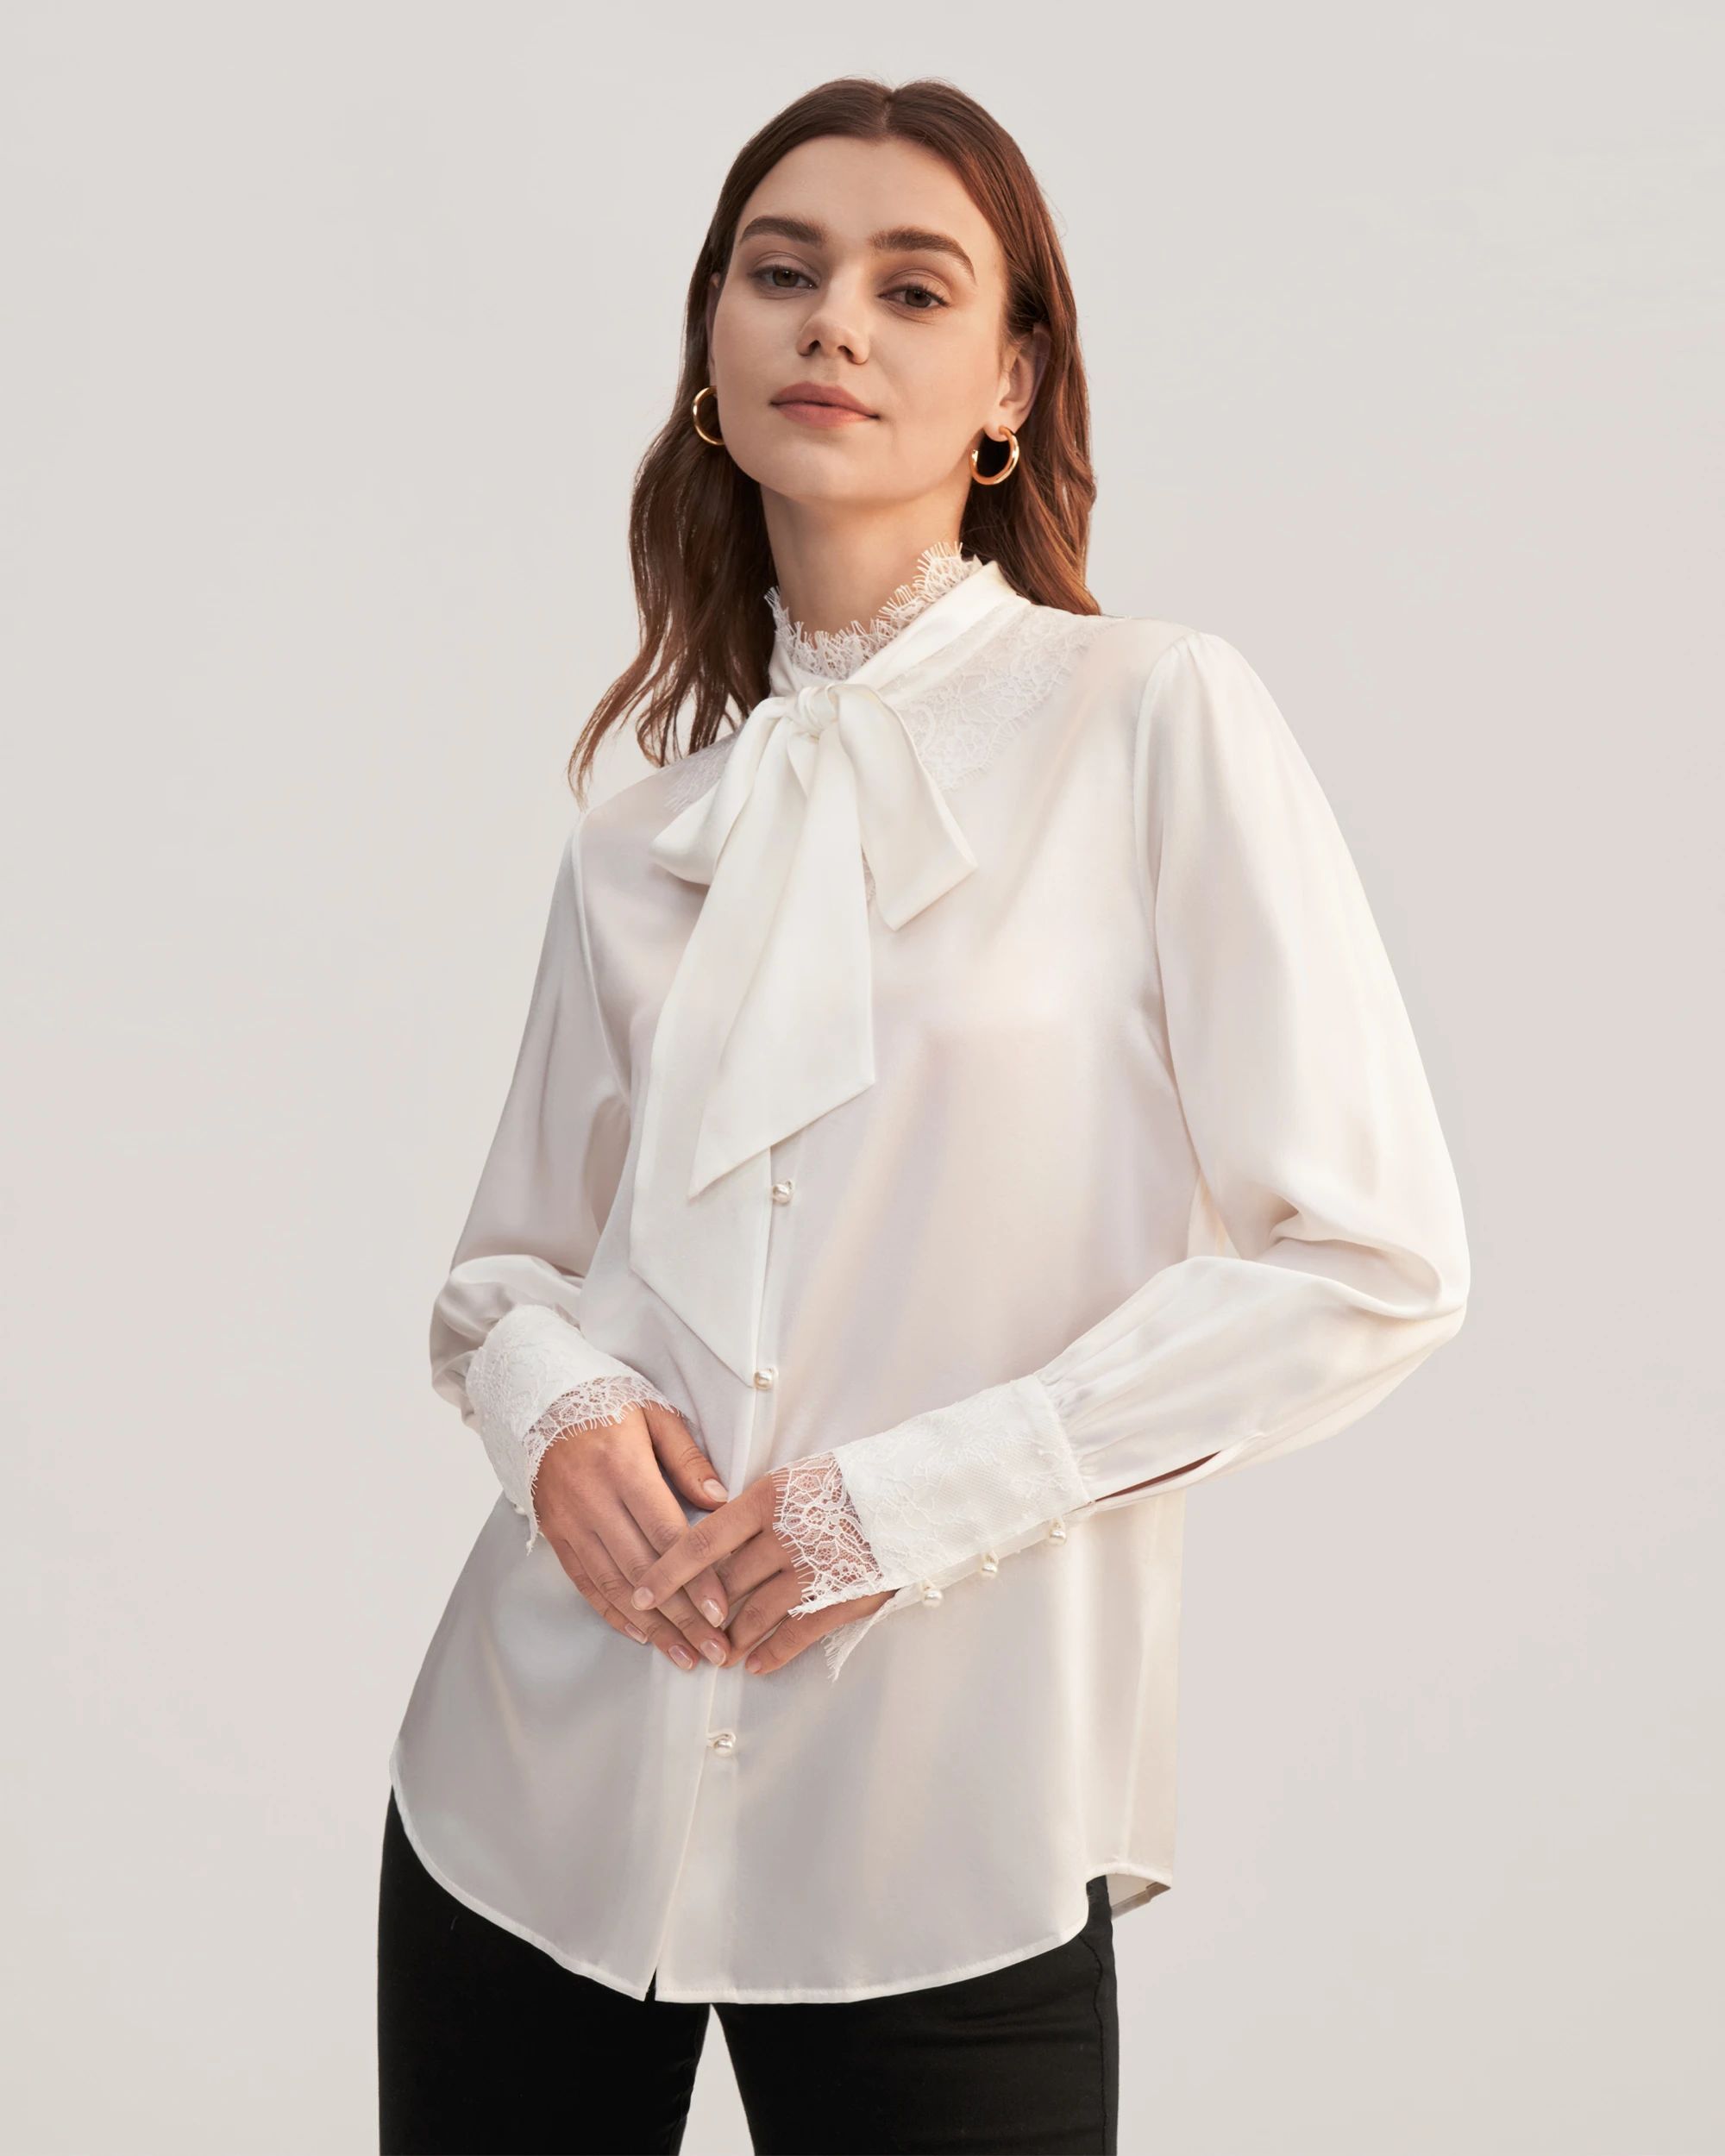 LILYSILK X MIM Lace Silk Blouse With Removable Bow | LilySilk